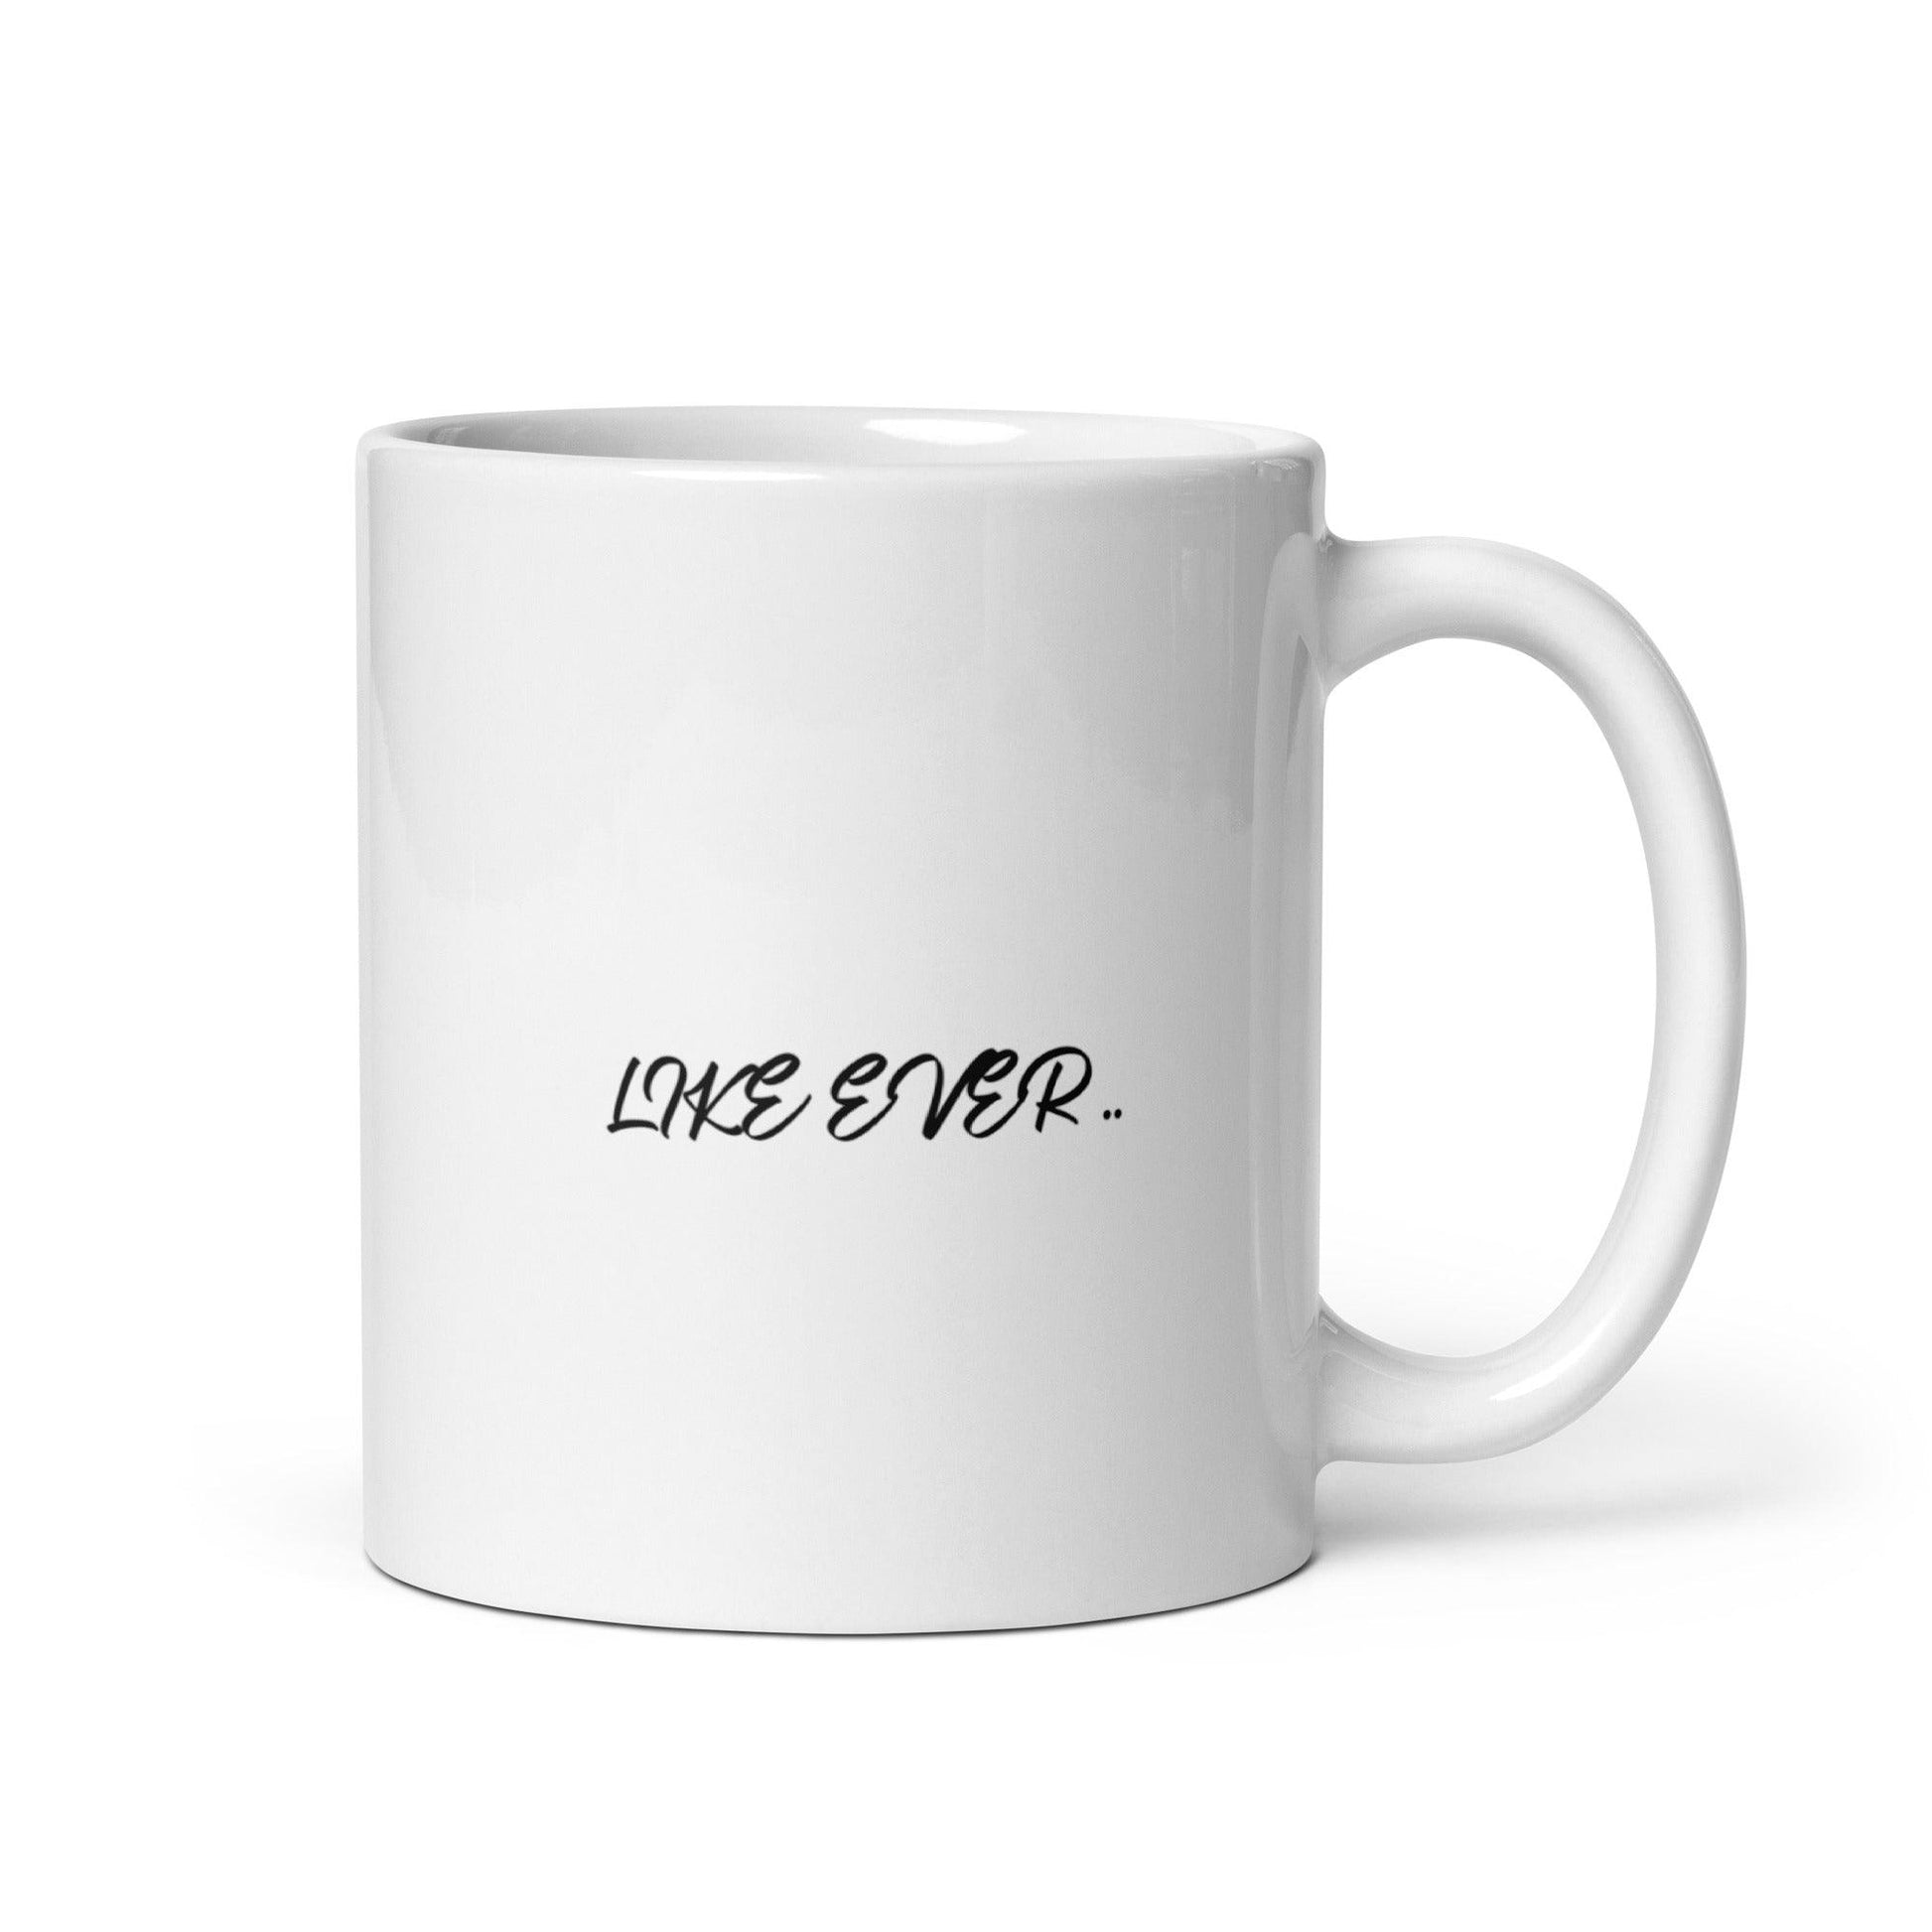 'BEST WIFE EVER' Glossy Mug Gift - Clover Collection Shop